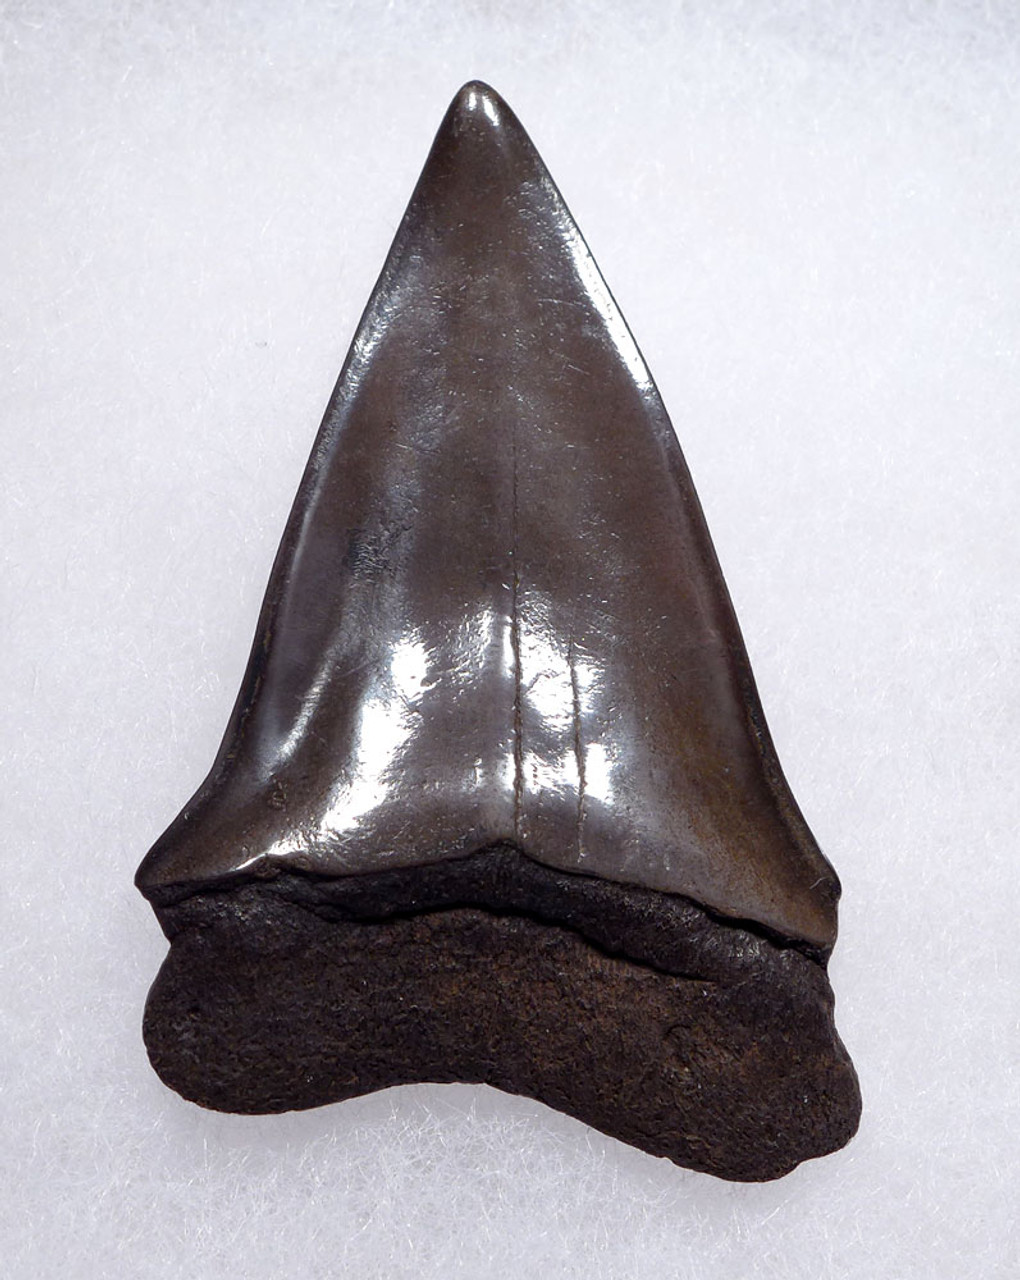 TOP COLLECTOR GRADE 2.2 INCH GEORGIA FOSSIL SHARK TOOTH OF ISURUS HASTALIS BROAD TOOTH MAKO WITH CHATOYANT PLATINUM ENAMEL  *SHX147